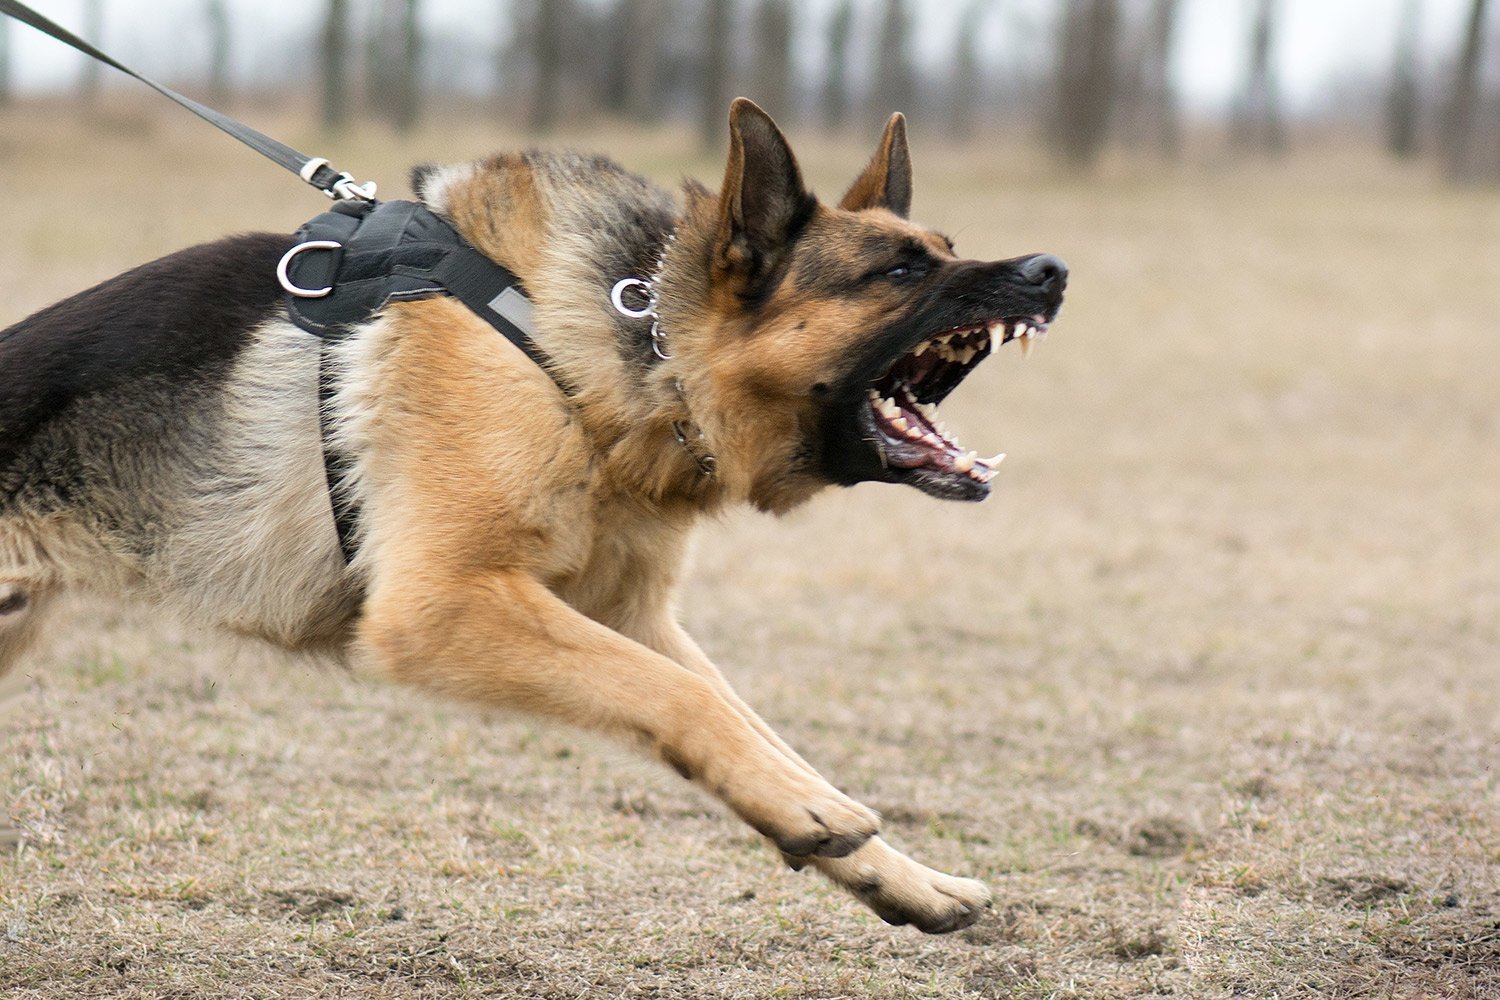 Recognition of signs of aggression in dog breeds